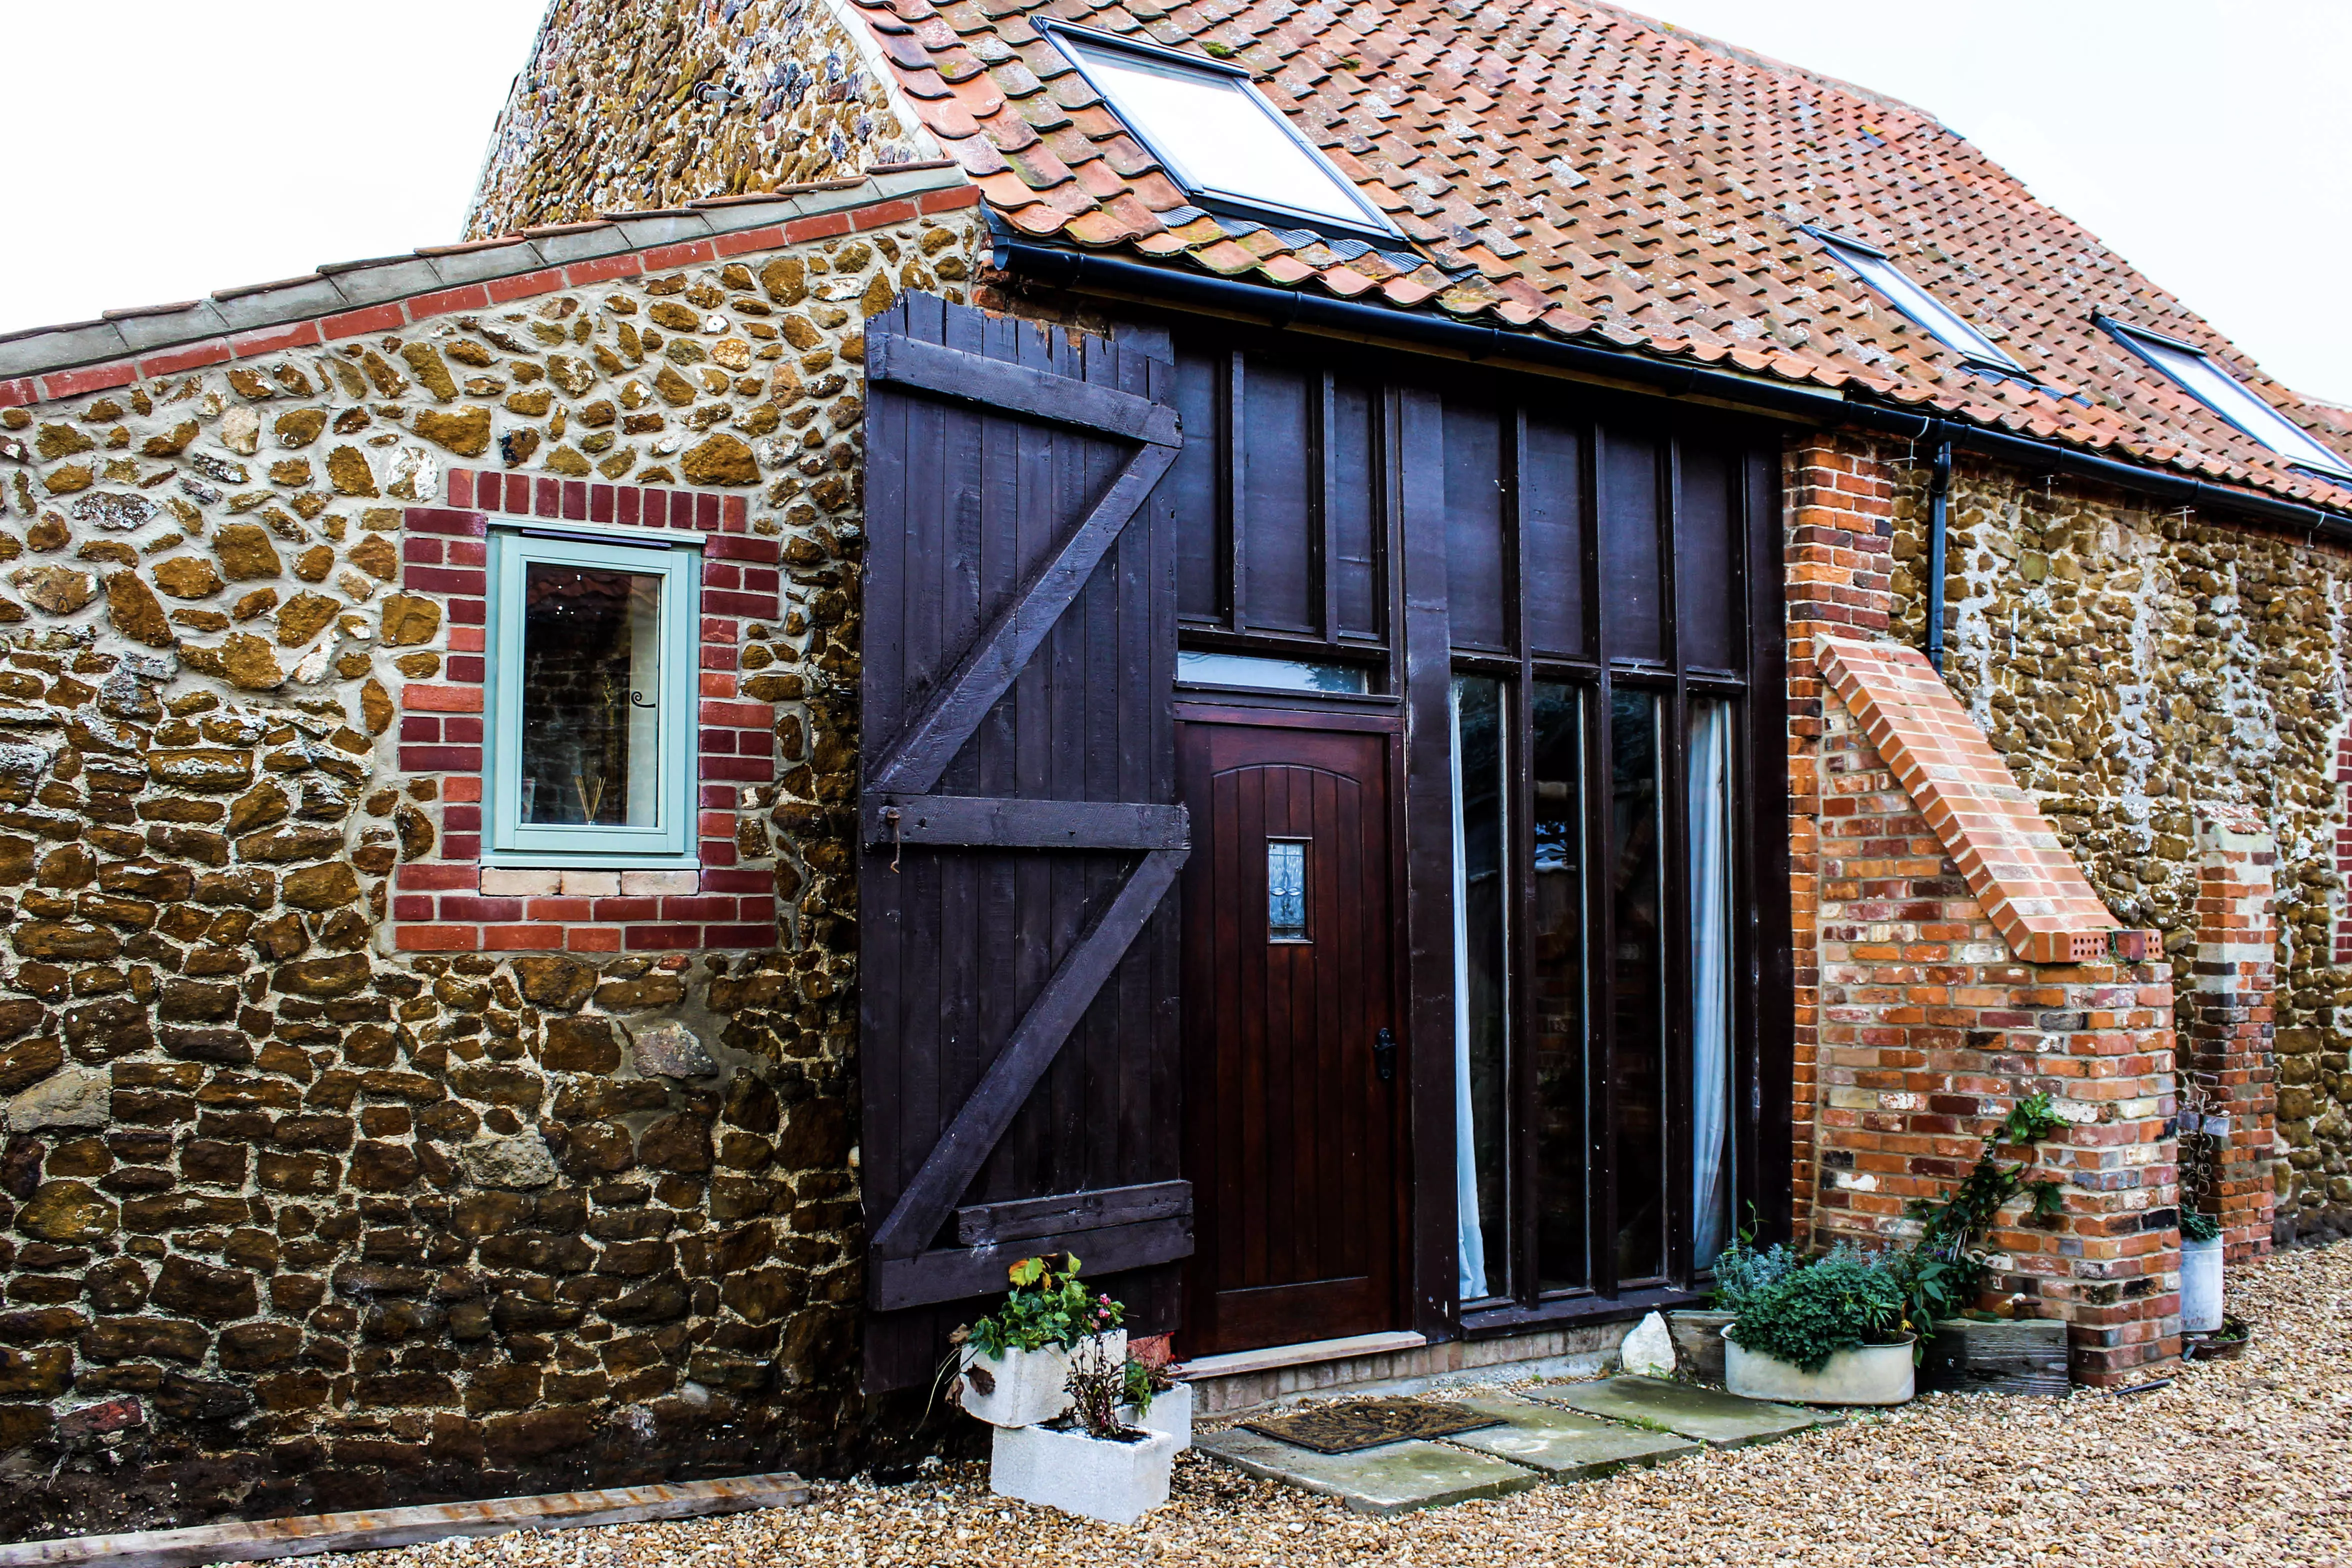 SANDRINGHAM STAY IN A COTTAGE: THE OLD BARN